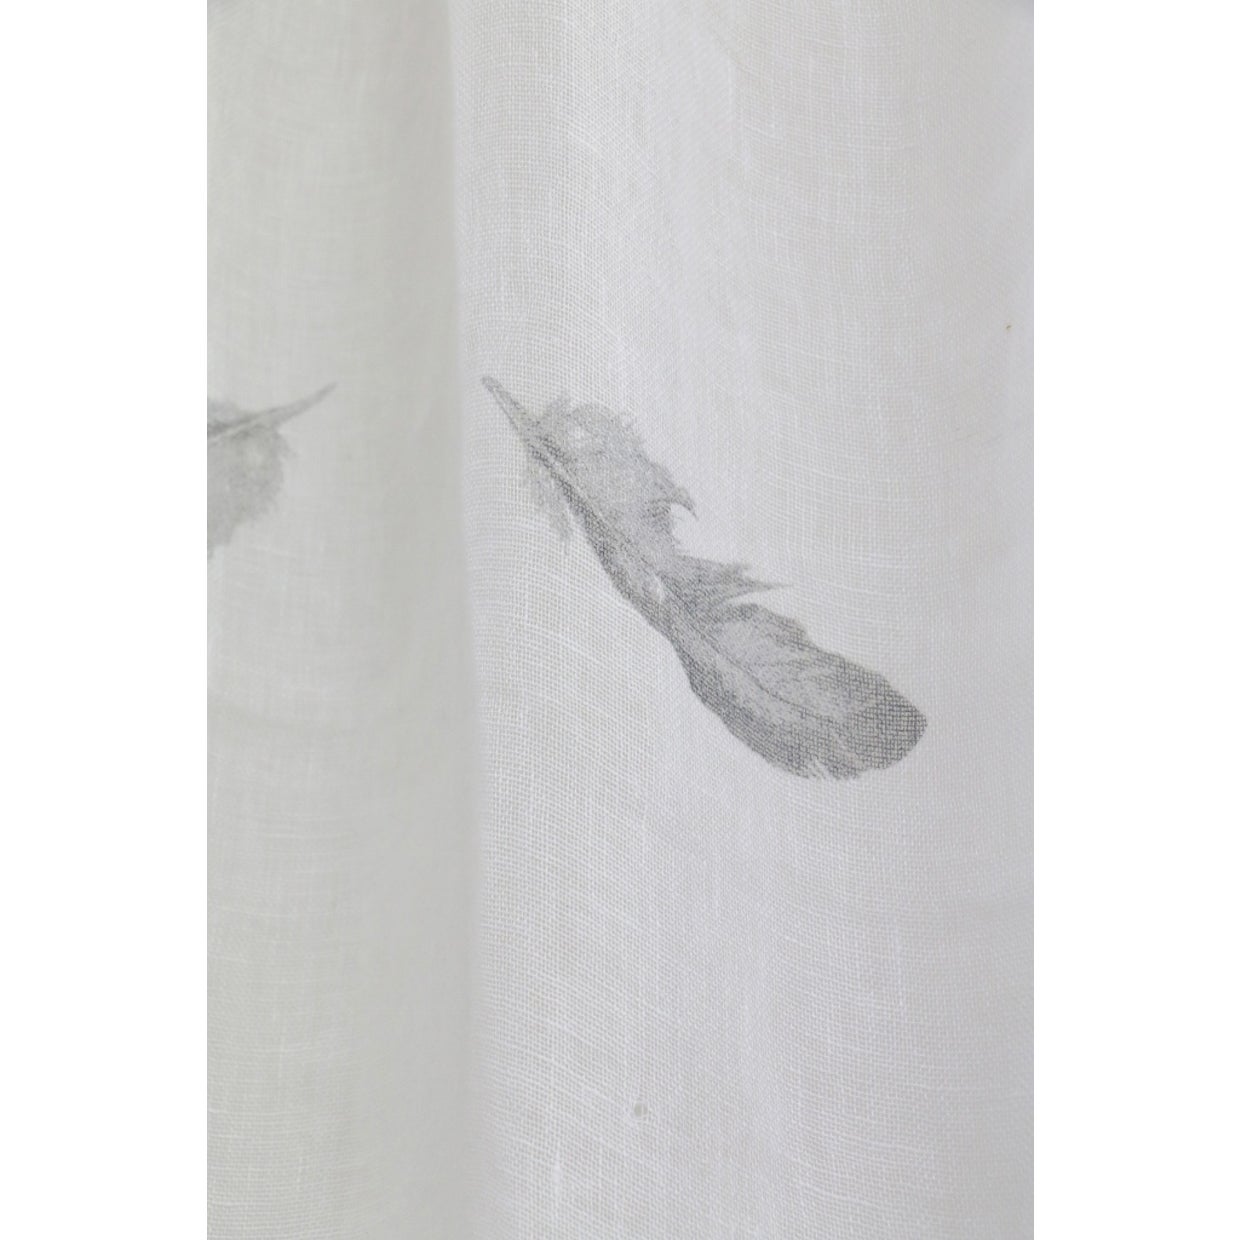 White Linen Feather Curtain